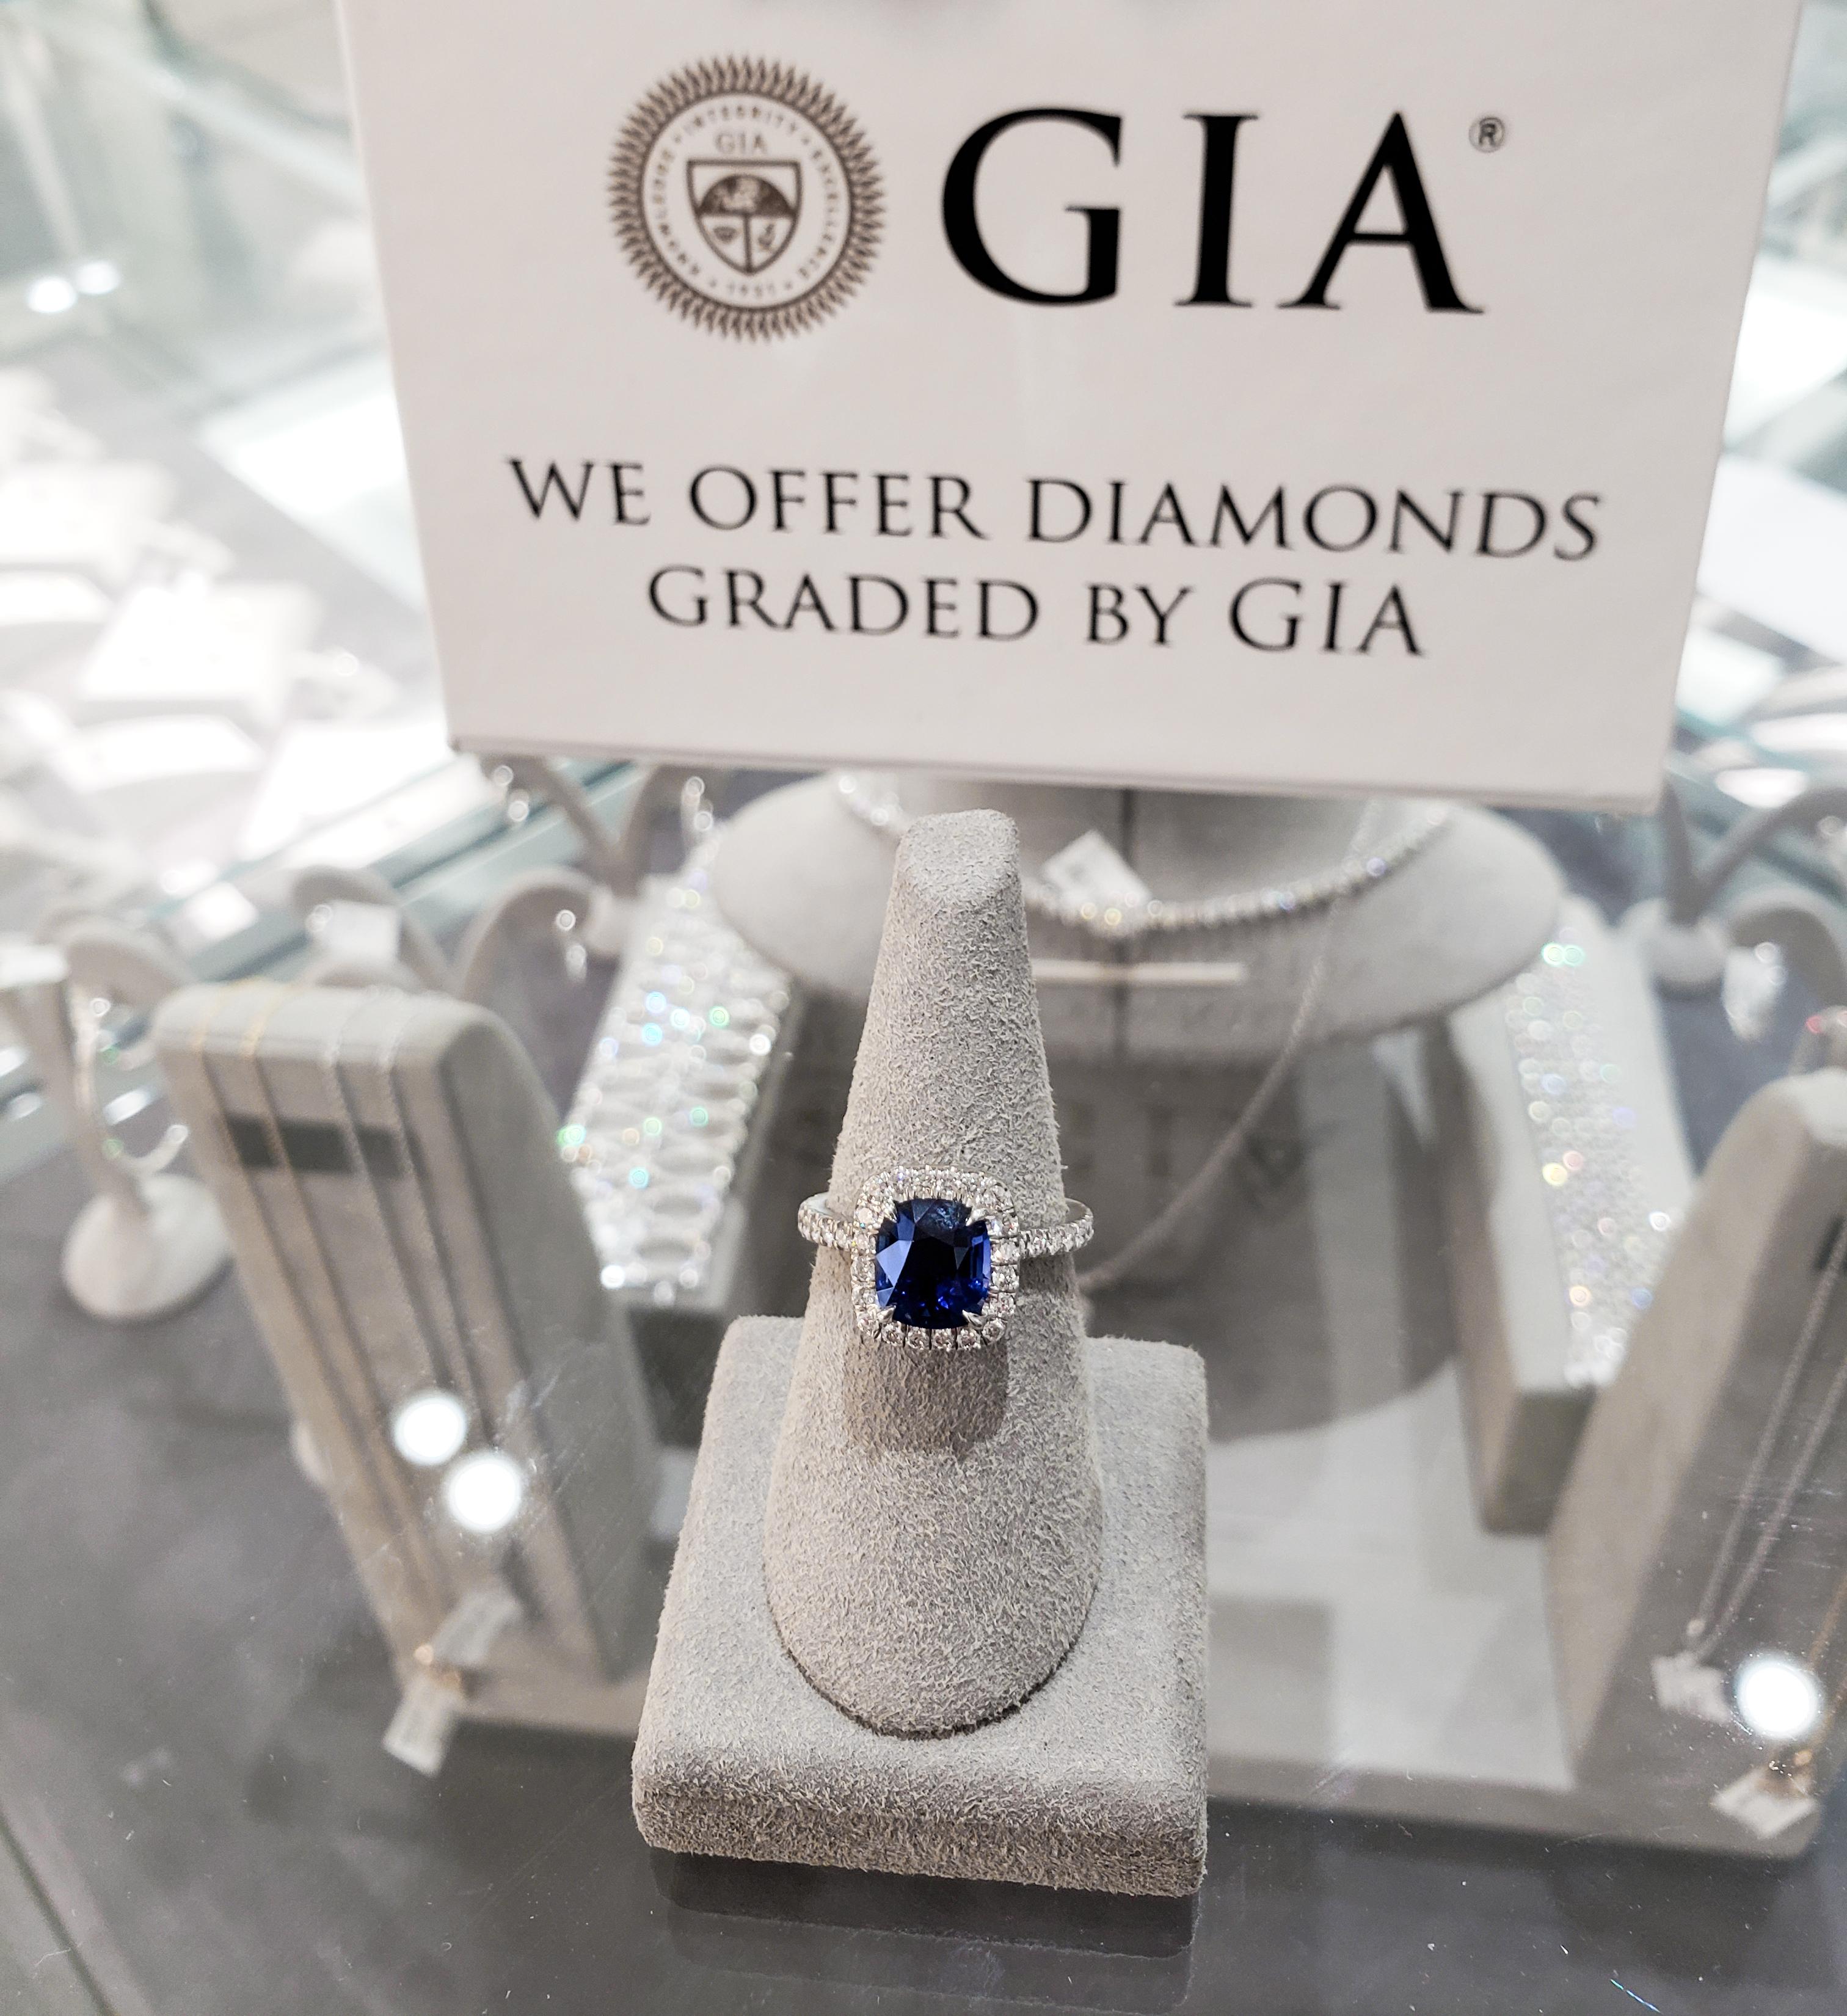 This is an incredibly gorgeous and color-rich engagement ring showcasing a 2.75 carat cushion cut sapphire that GIA certified as BLUE in color with no indications of heat treatment. The center stone is surrounded by a single row of sparkling round